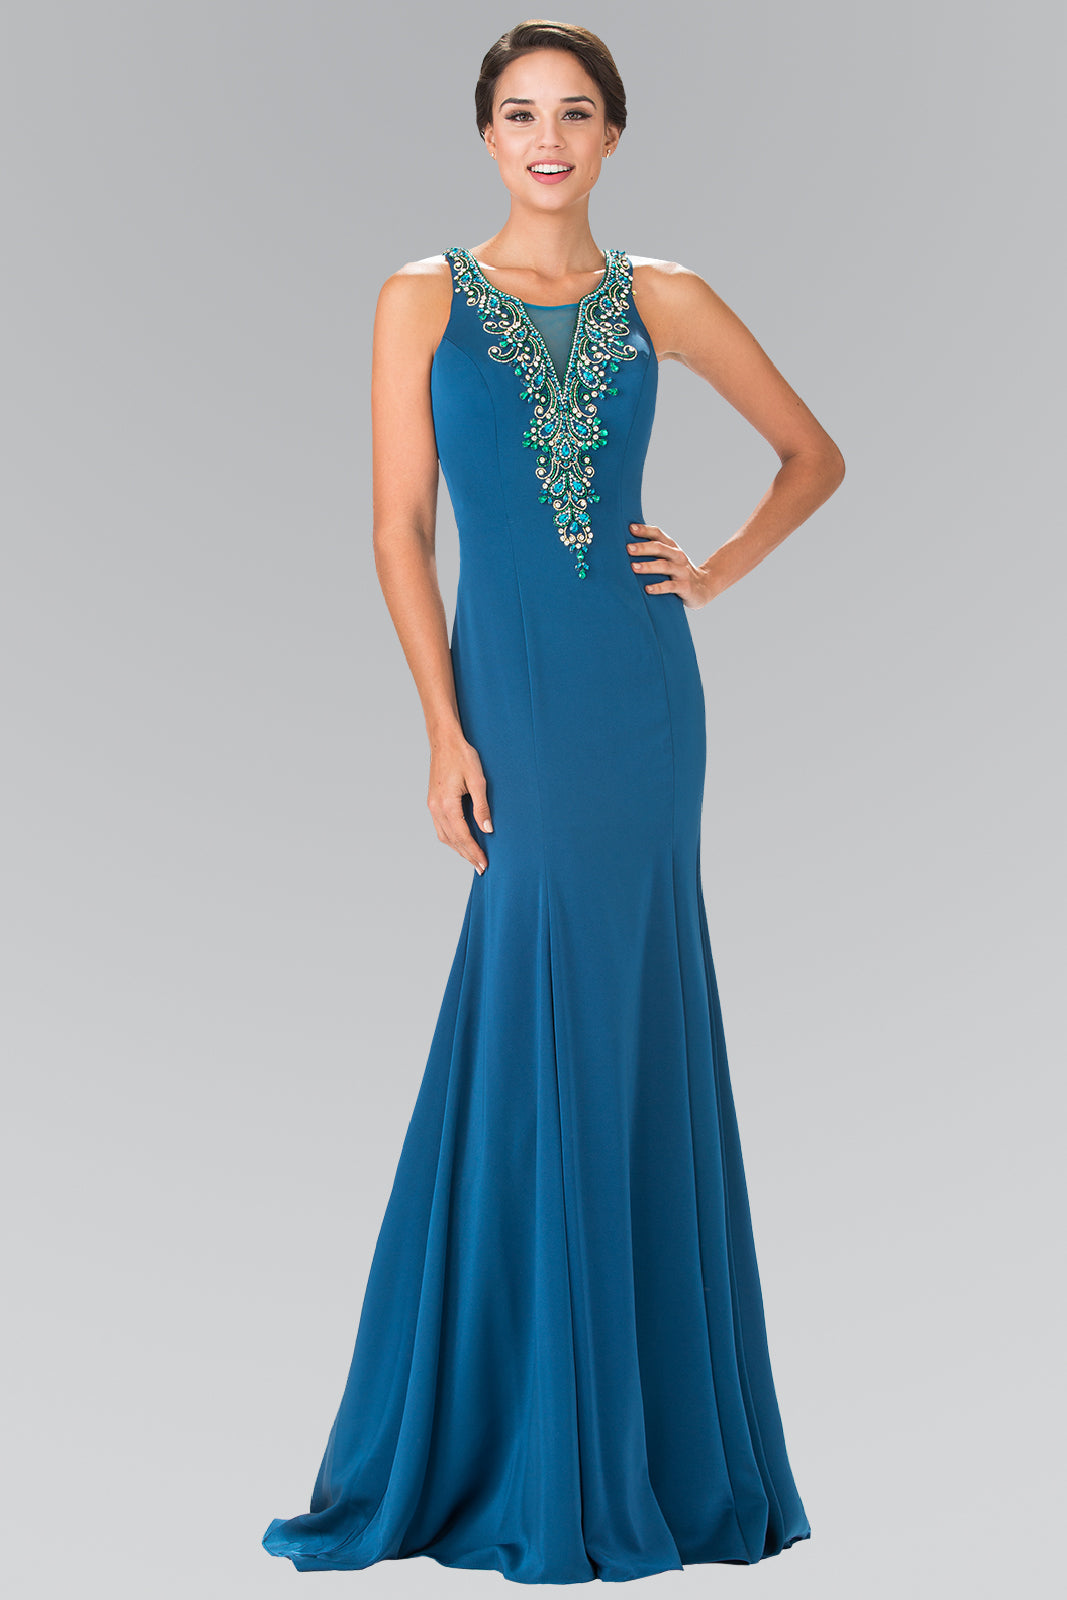 Illusion V-Neck Beaded Top Long Dress with Sheer Back GLGL2310 Elsy Style PROM